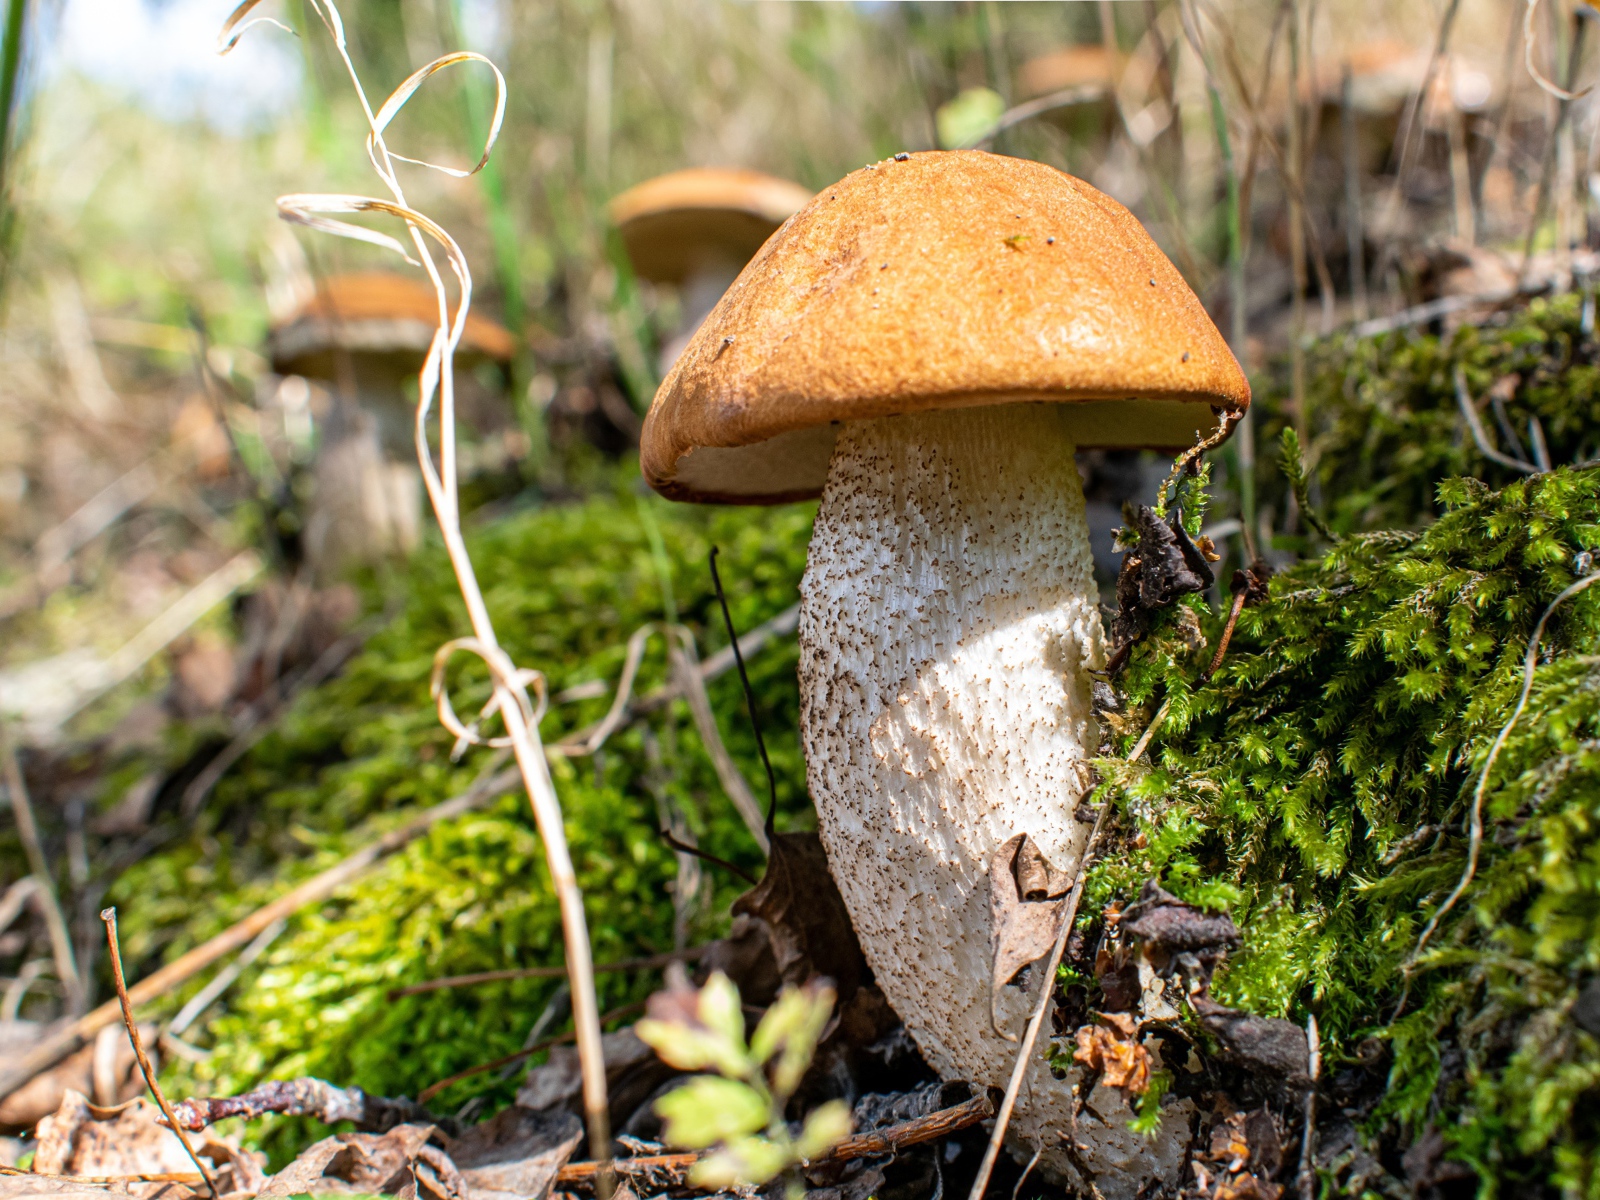 A large porcini mushroom grows on moss-covered ground